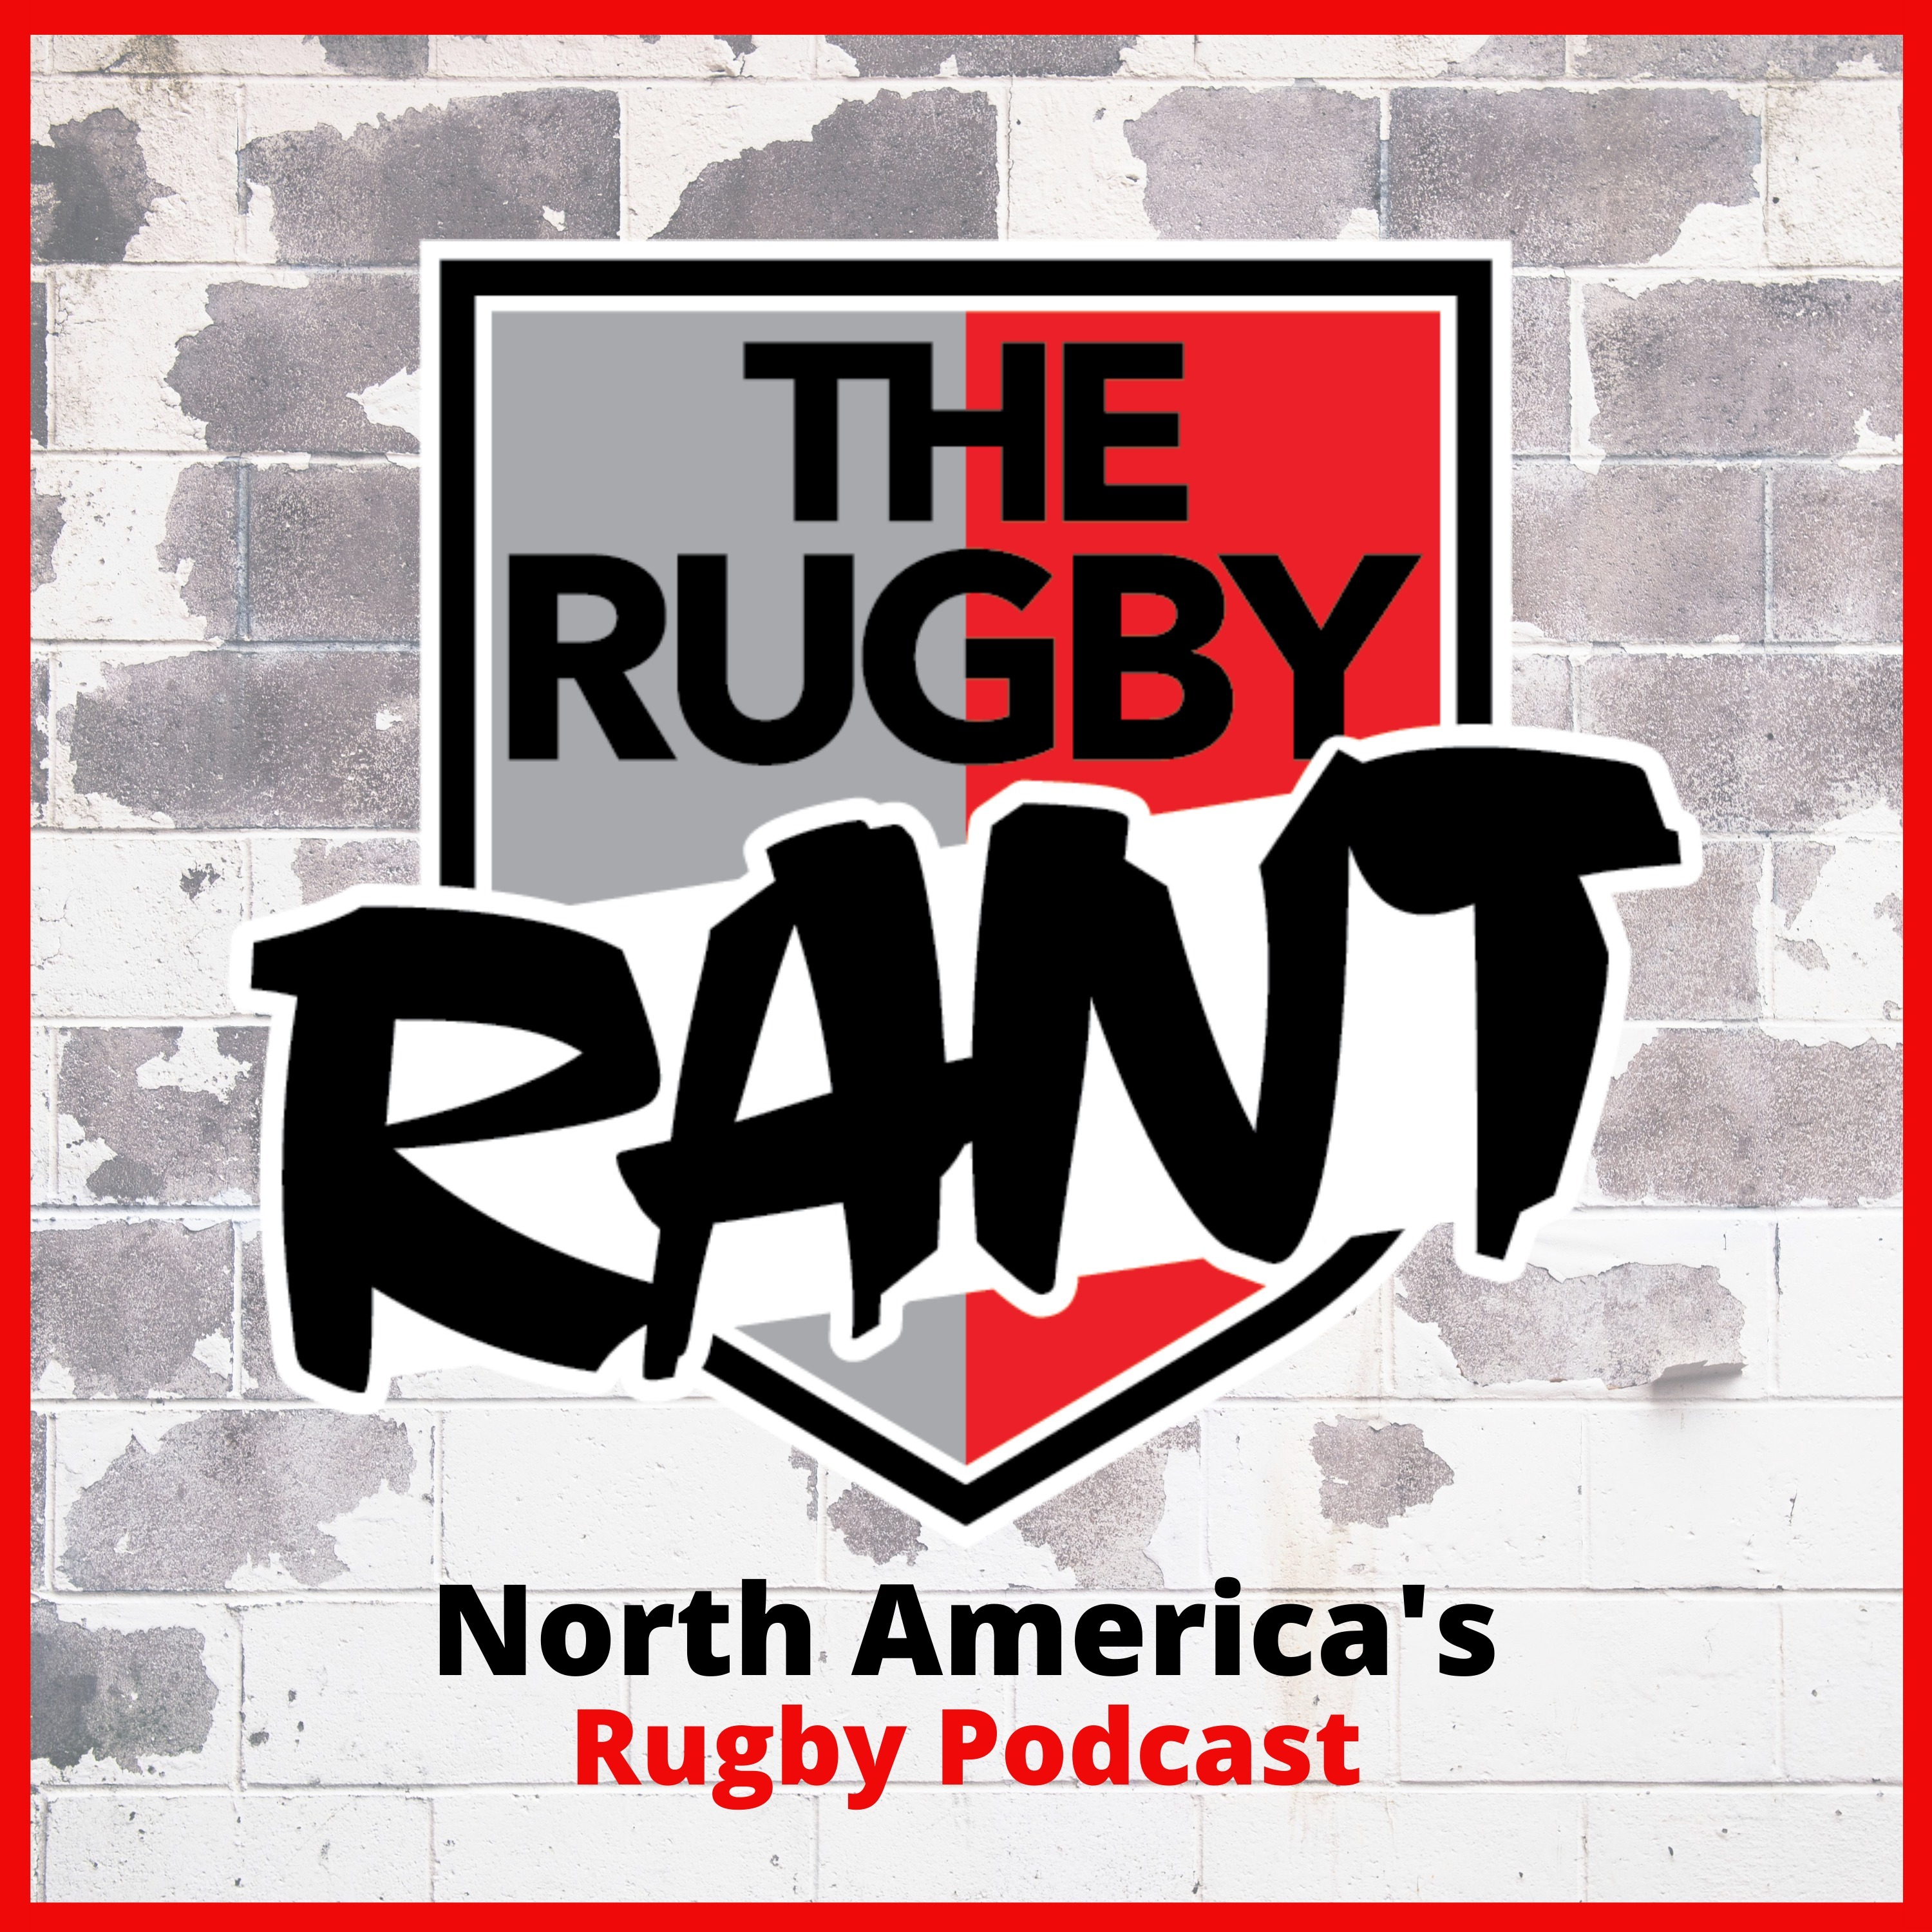 The Rugby Rant - Run, Pass or Kick with Paul Healy